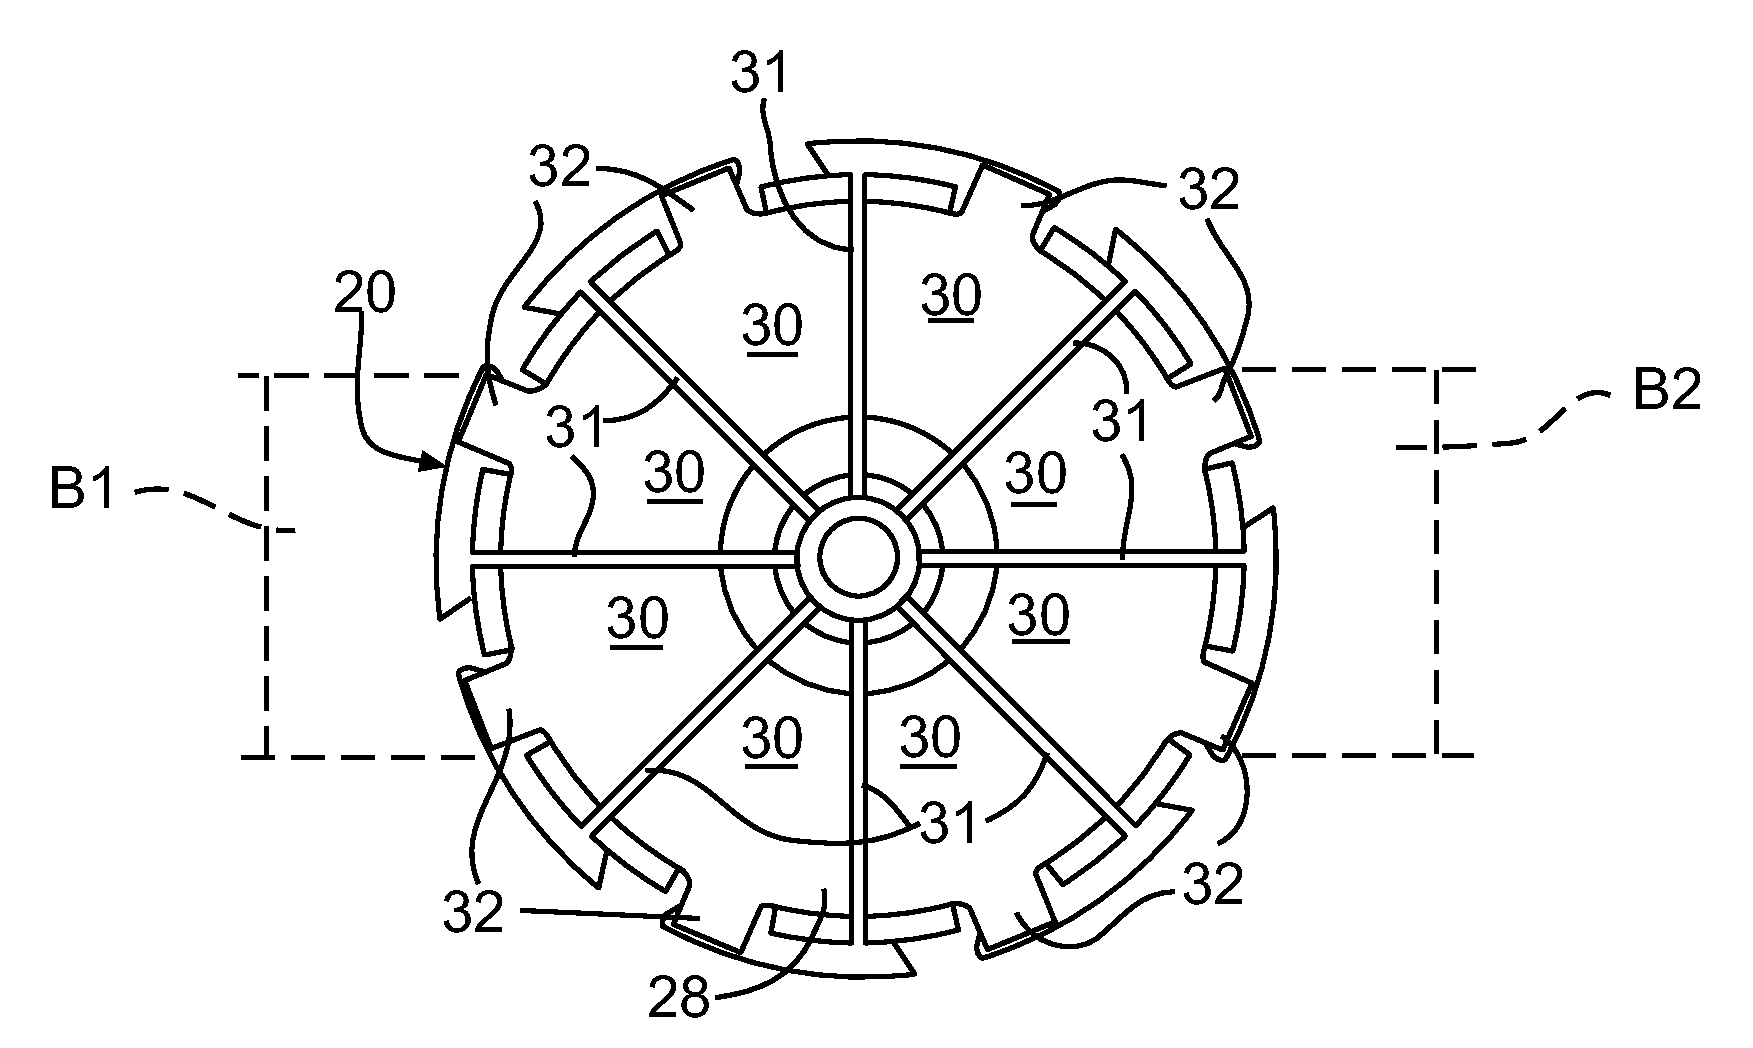 Method for Monitoring the Condition of a Commutator of an Electric Motor